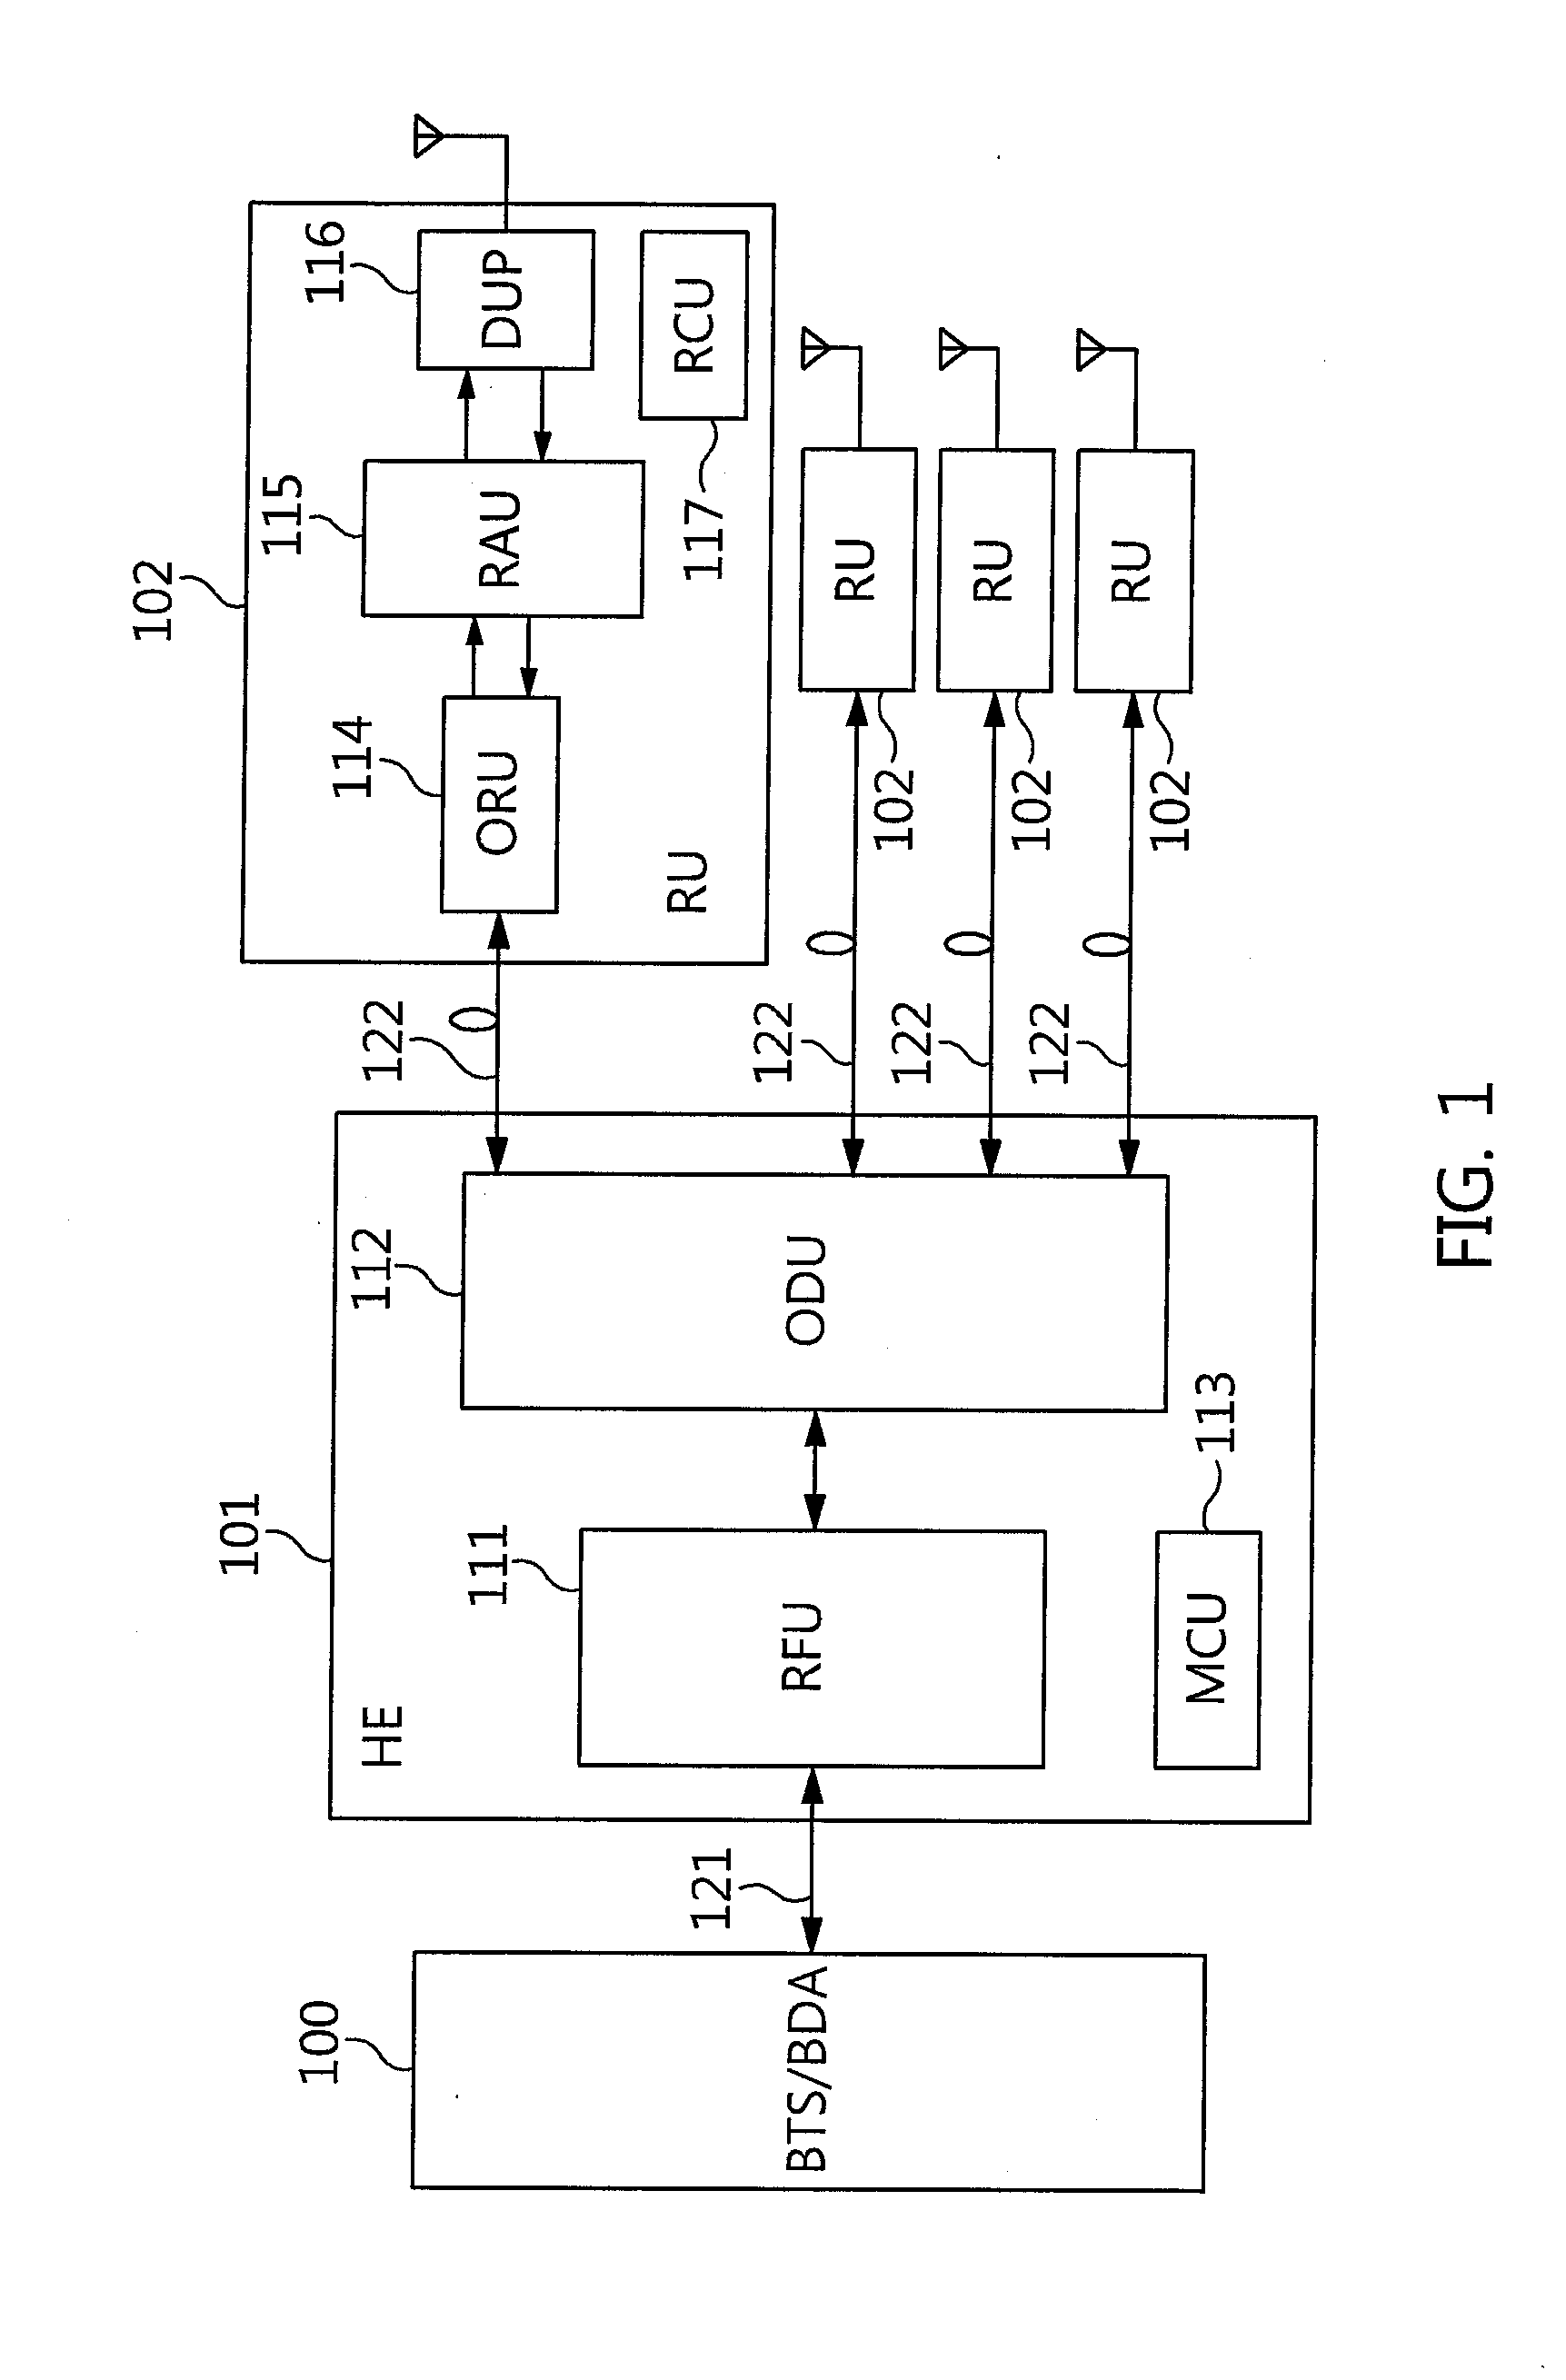 System and method for automatically measuring uplink noise level of distributed antenna system